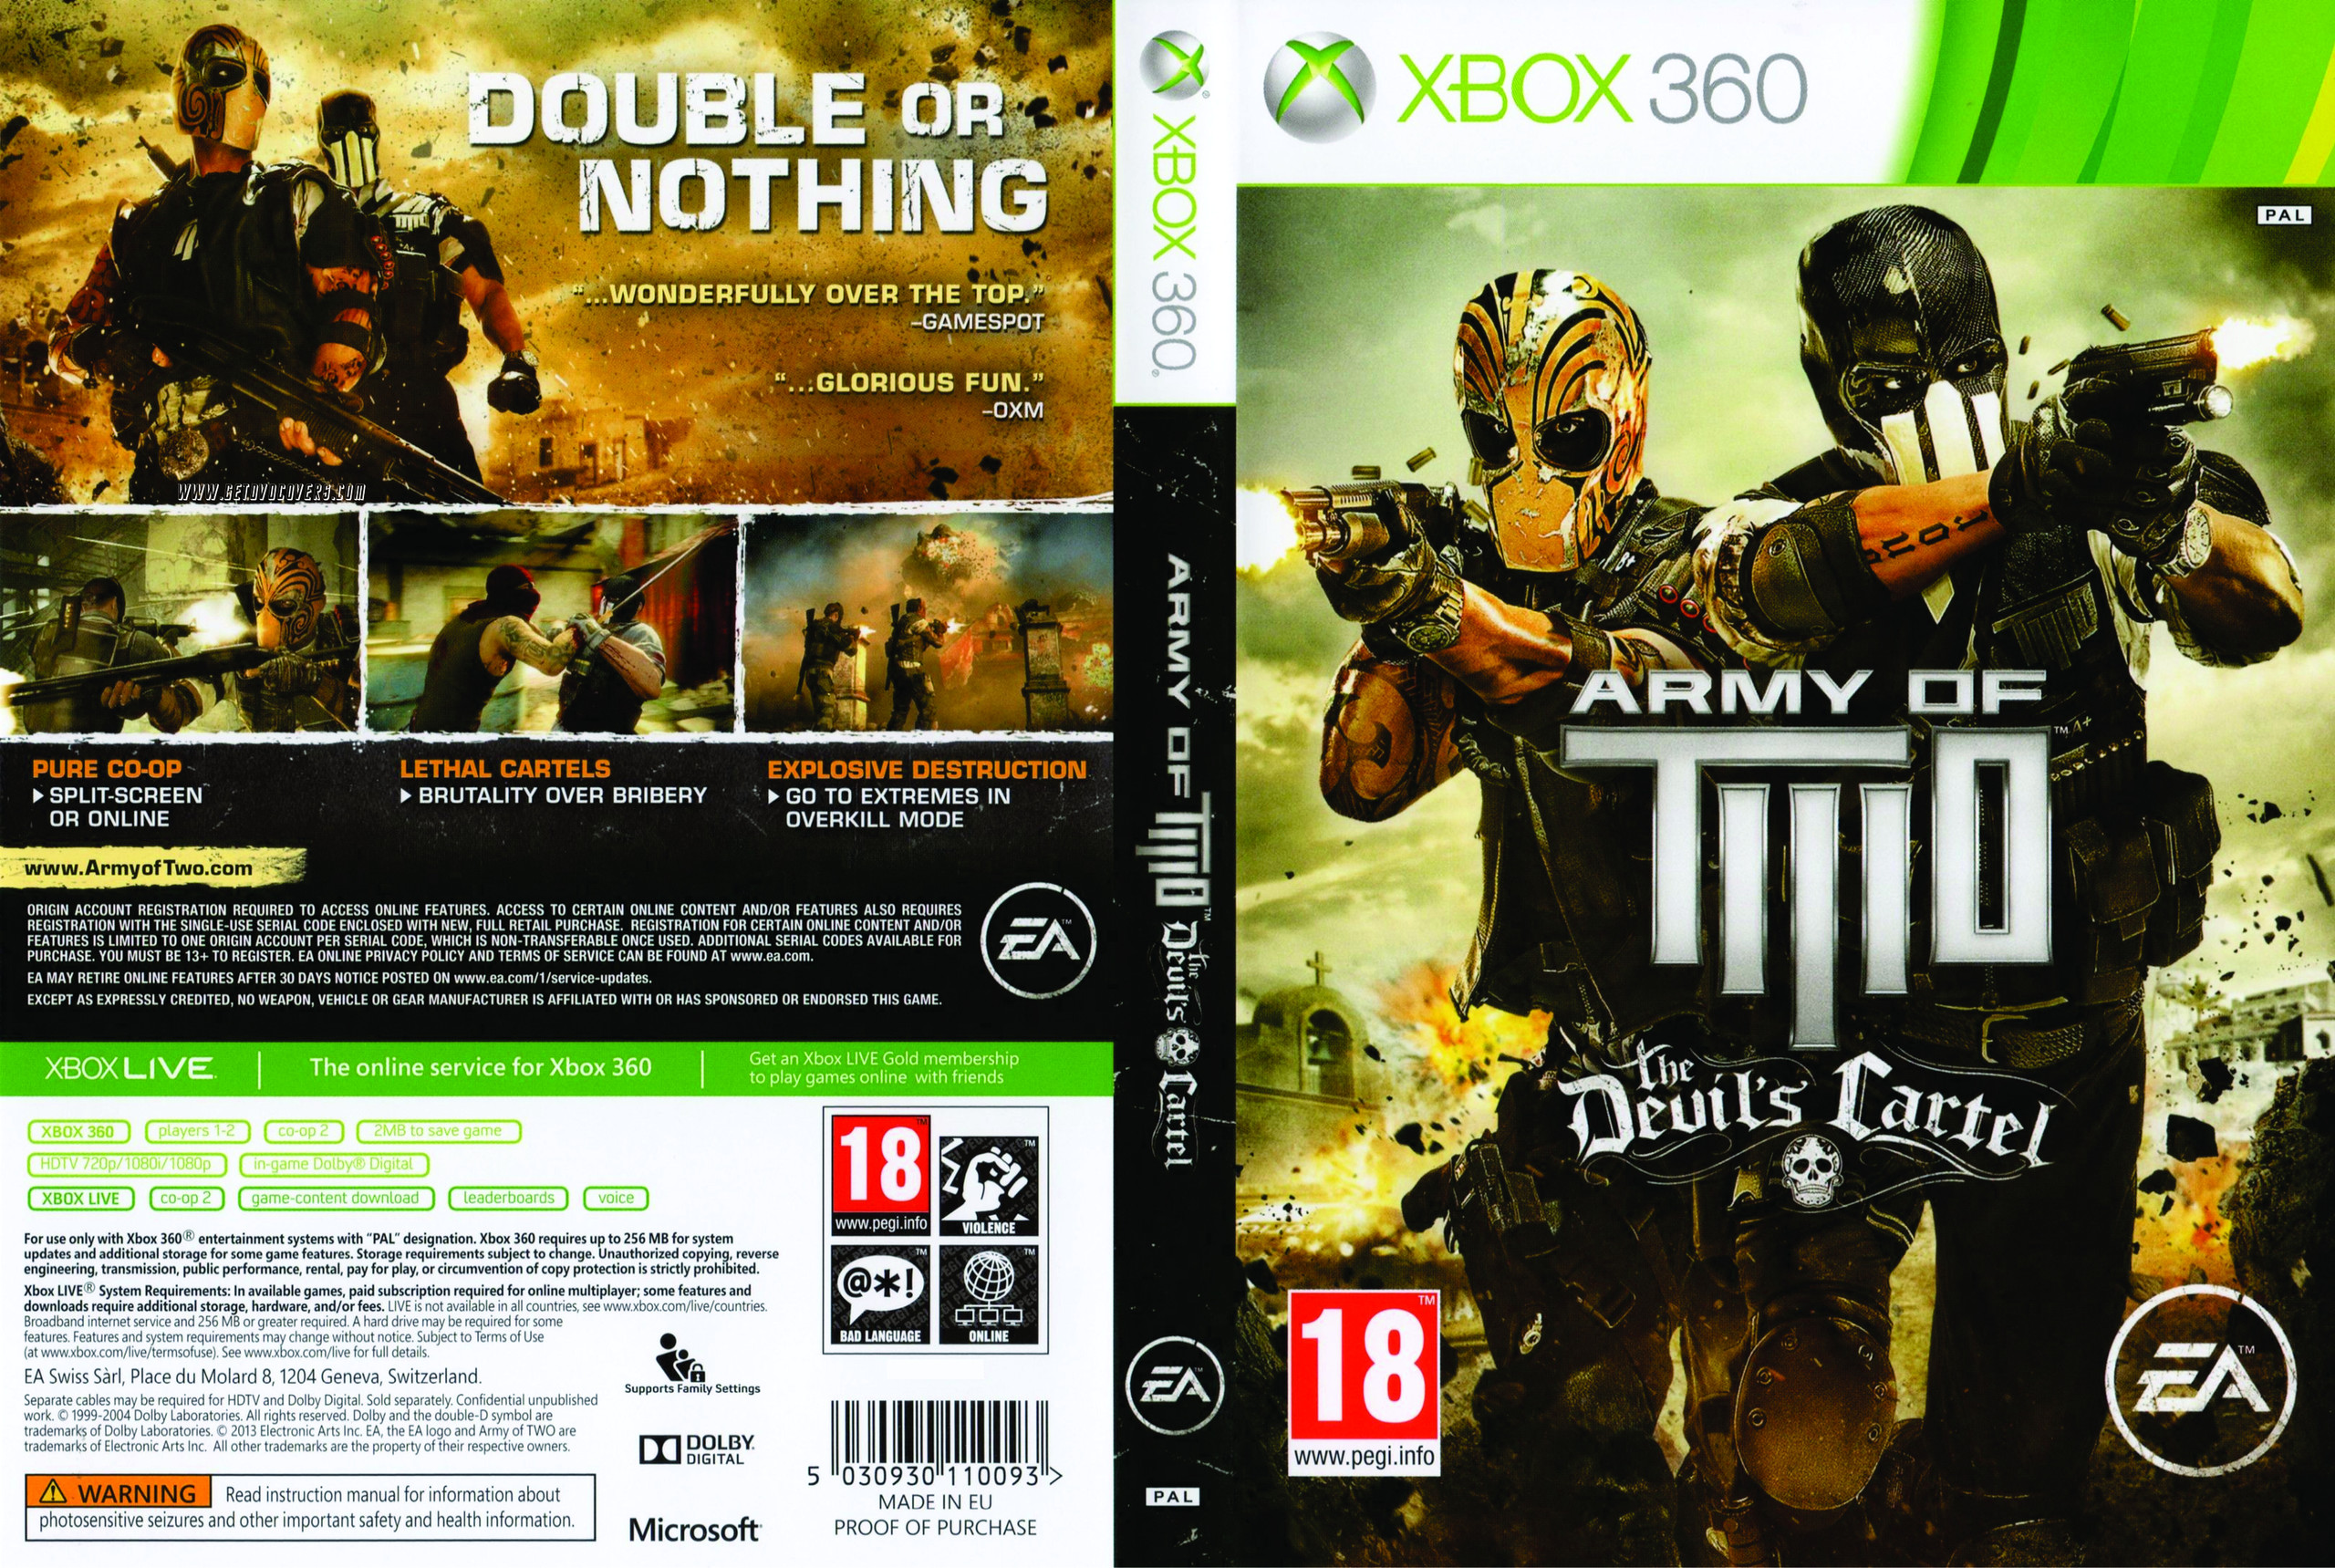 Формат игр xbox 360. Army of two Xbox 360 обложка. Army of two на Икс бокс 360. Обложки к играм Xbox 360 Army of two. Army of two the Devil's Cartel Xbox 360.